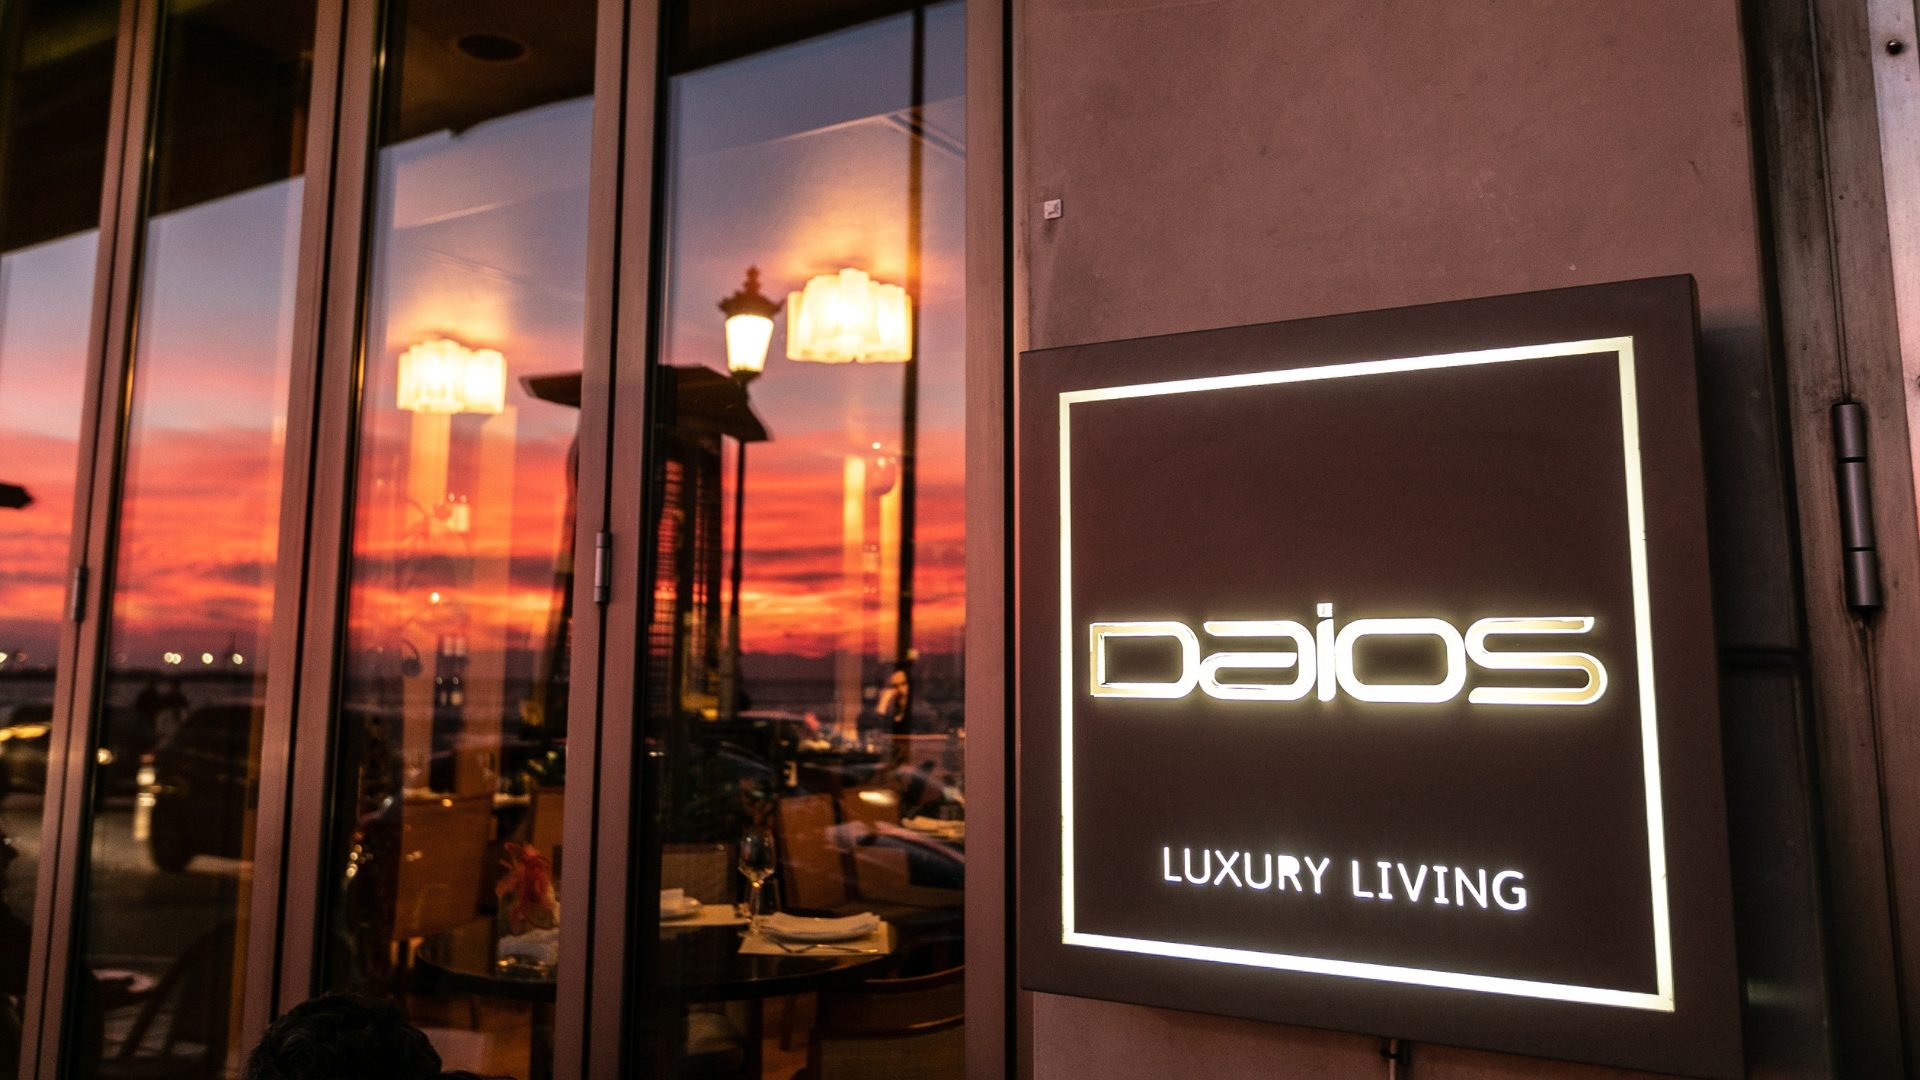 Daios Luxury Living label outside the building